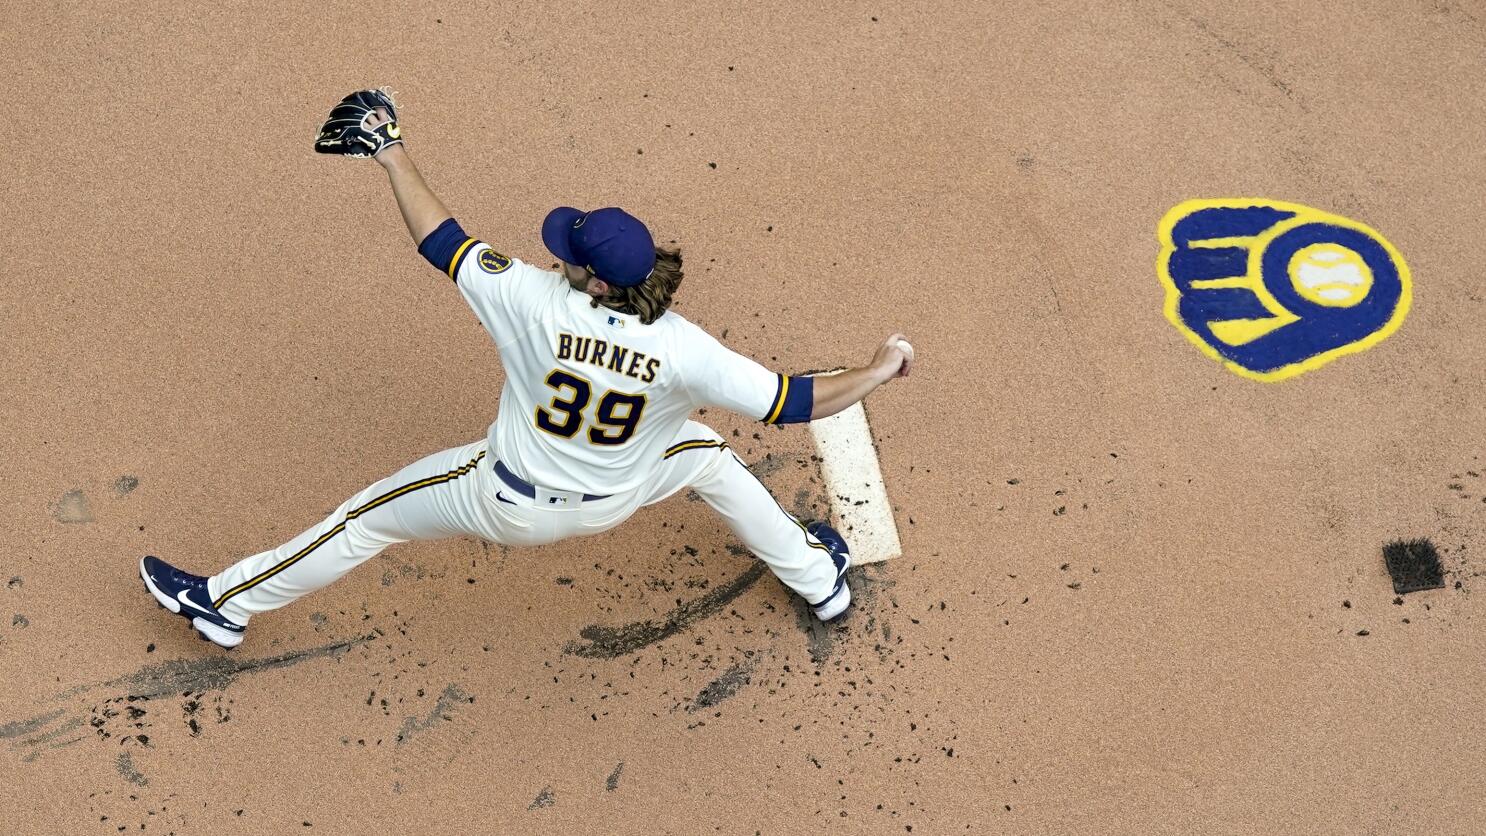 Brewers complete DH sweep of Giants; Peralta exits early - The San